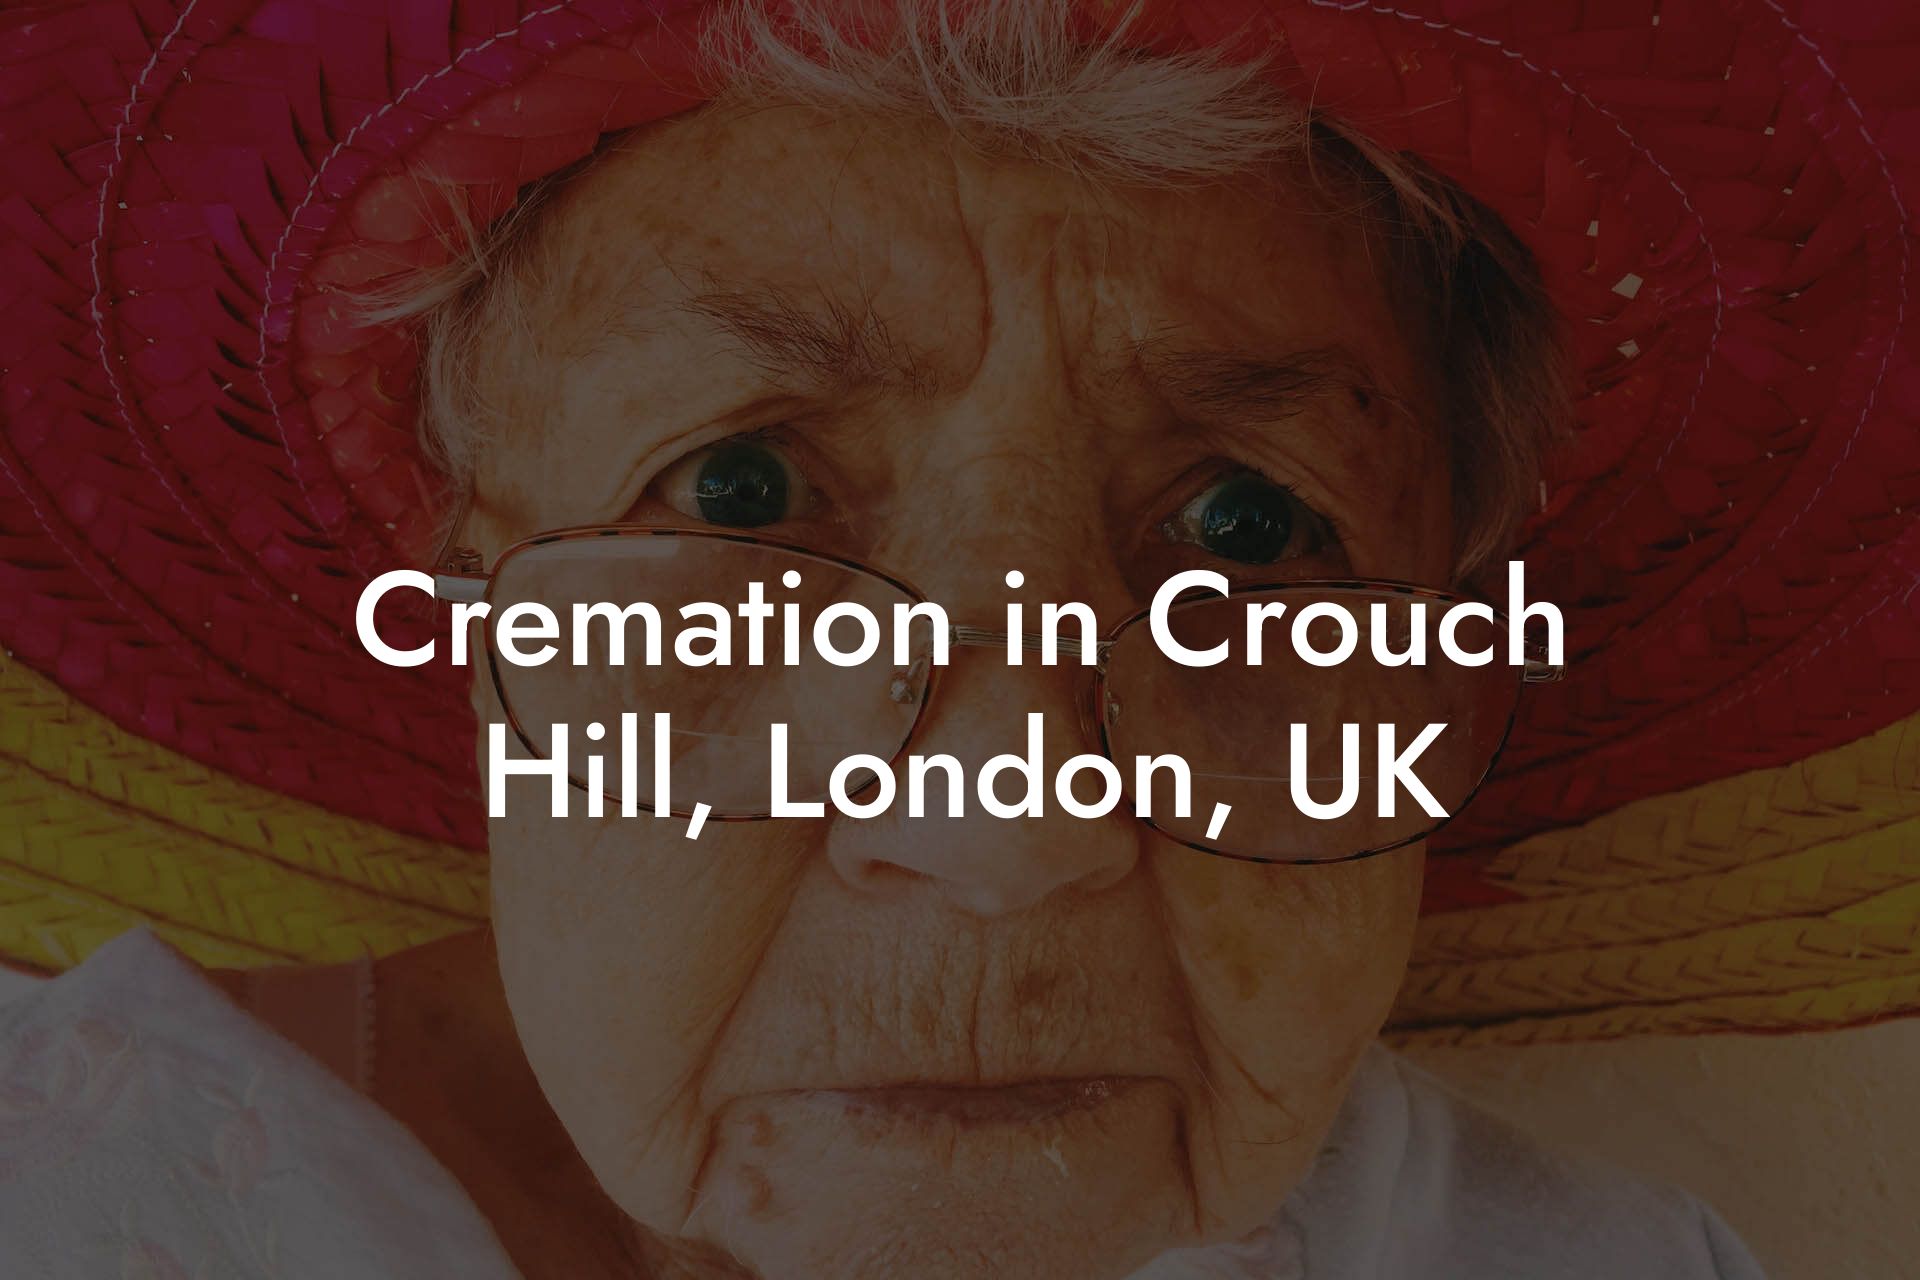 Cremation in Crouch Hill, London, UK